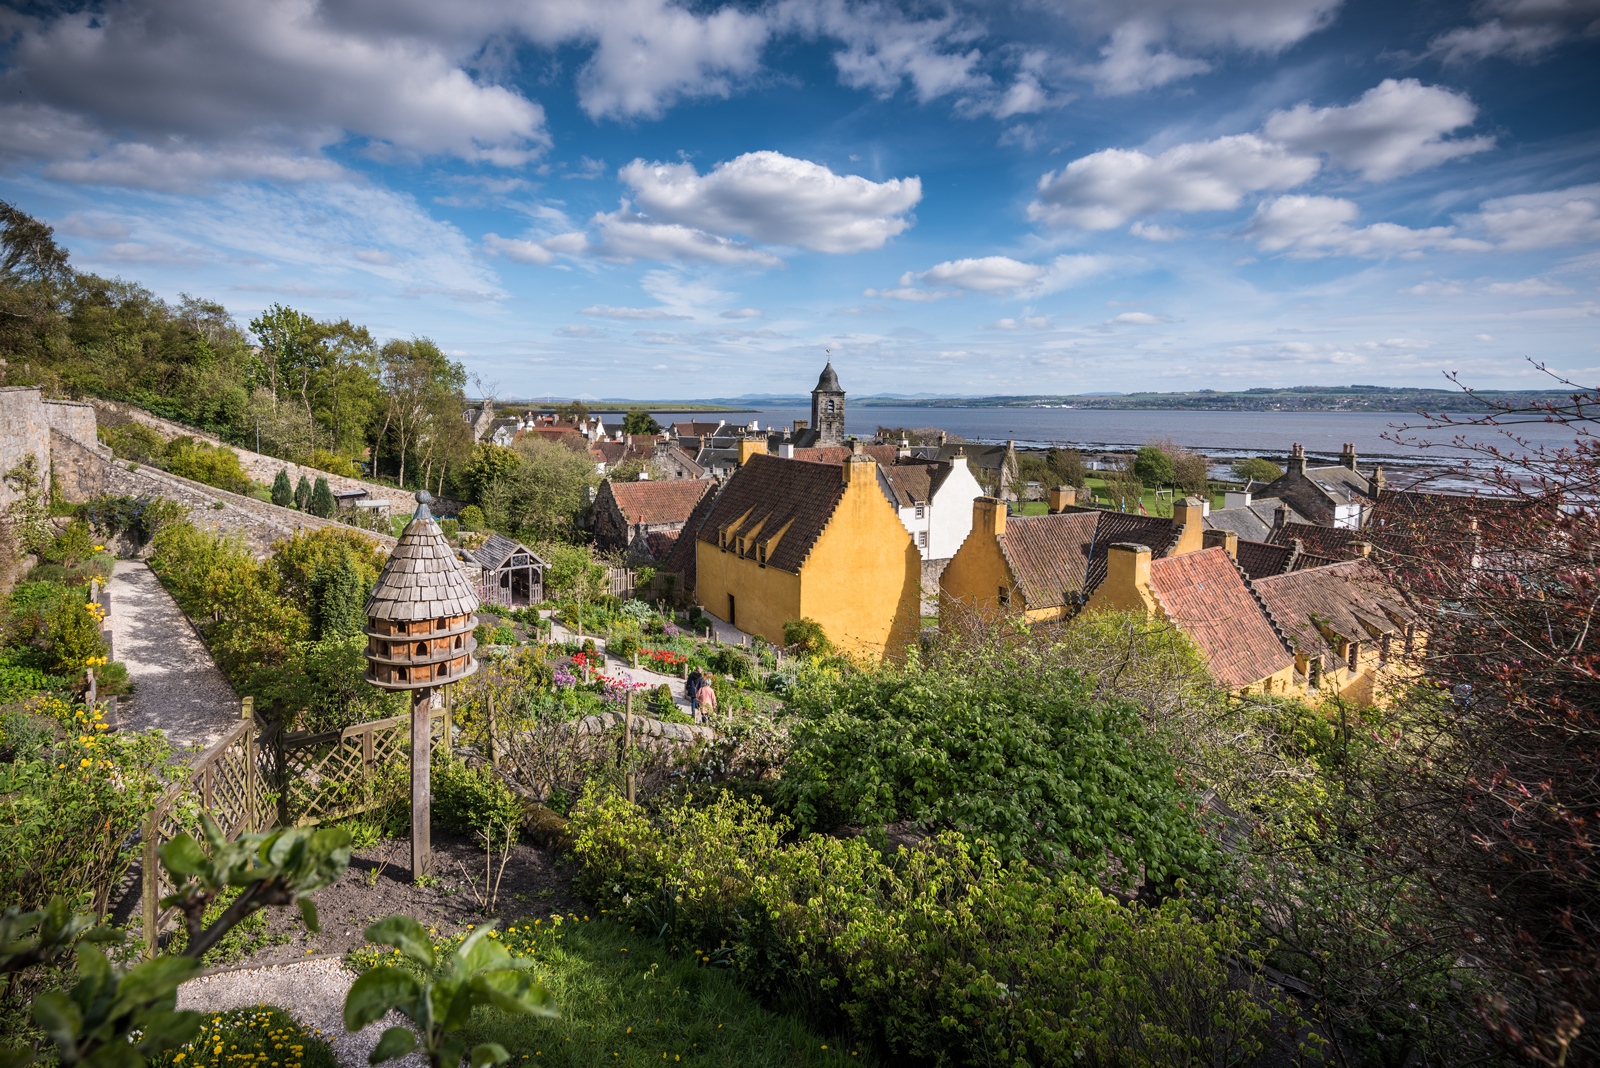 Some of the brightly coloured buildings in Culross village looking out to sea